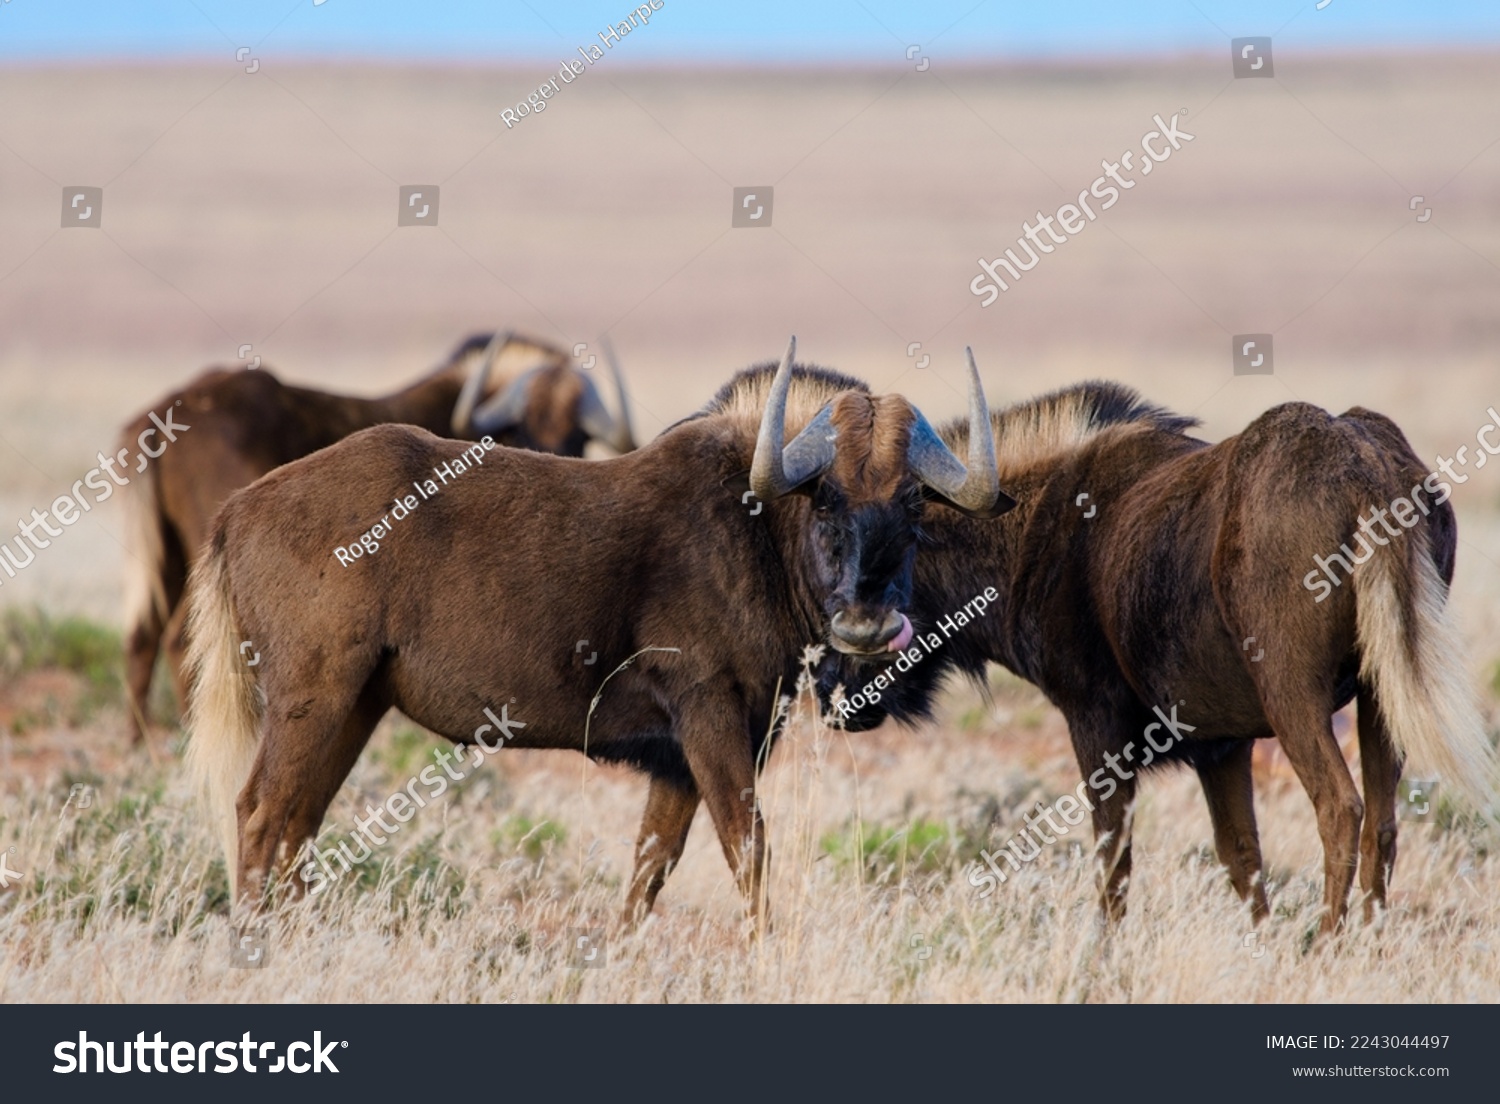 Black wildebeest or white-tailed gnu (Connochaetes gnou) standing in grassland. Eastern Cape. South Africa. #2243044497